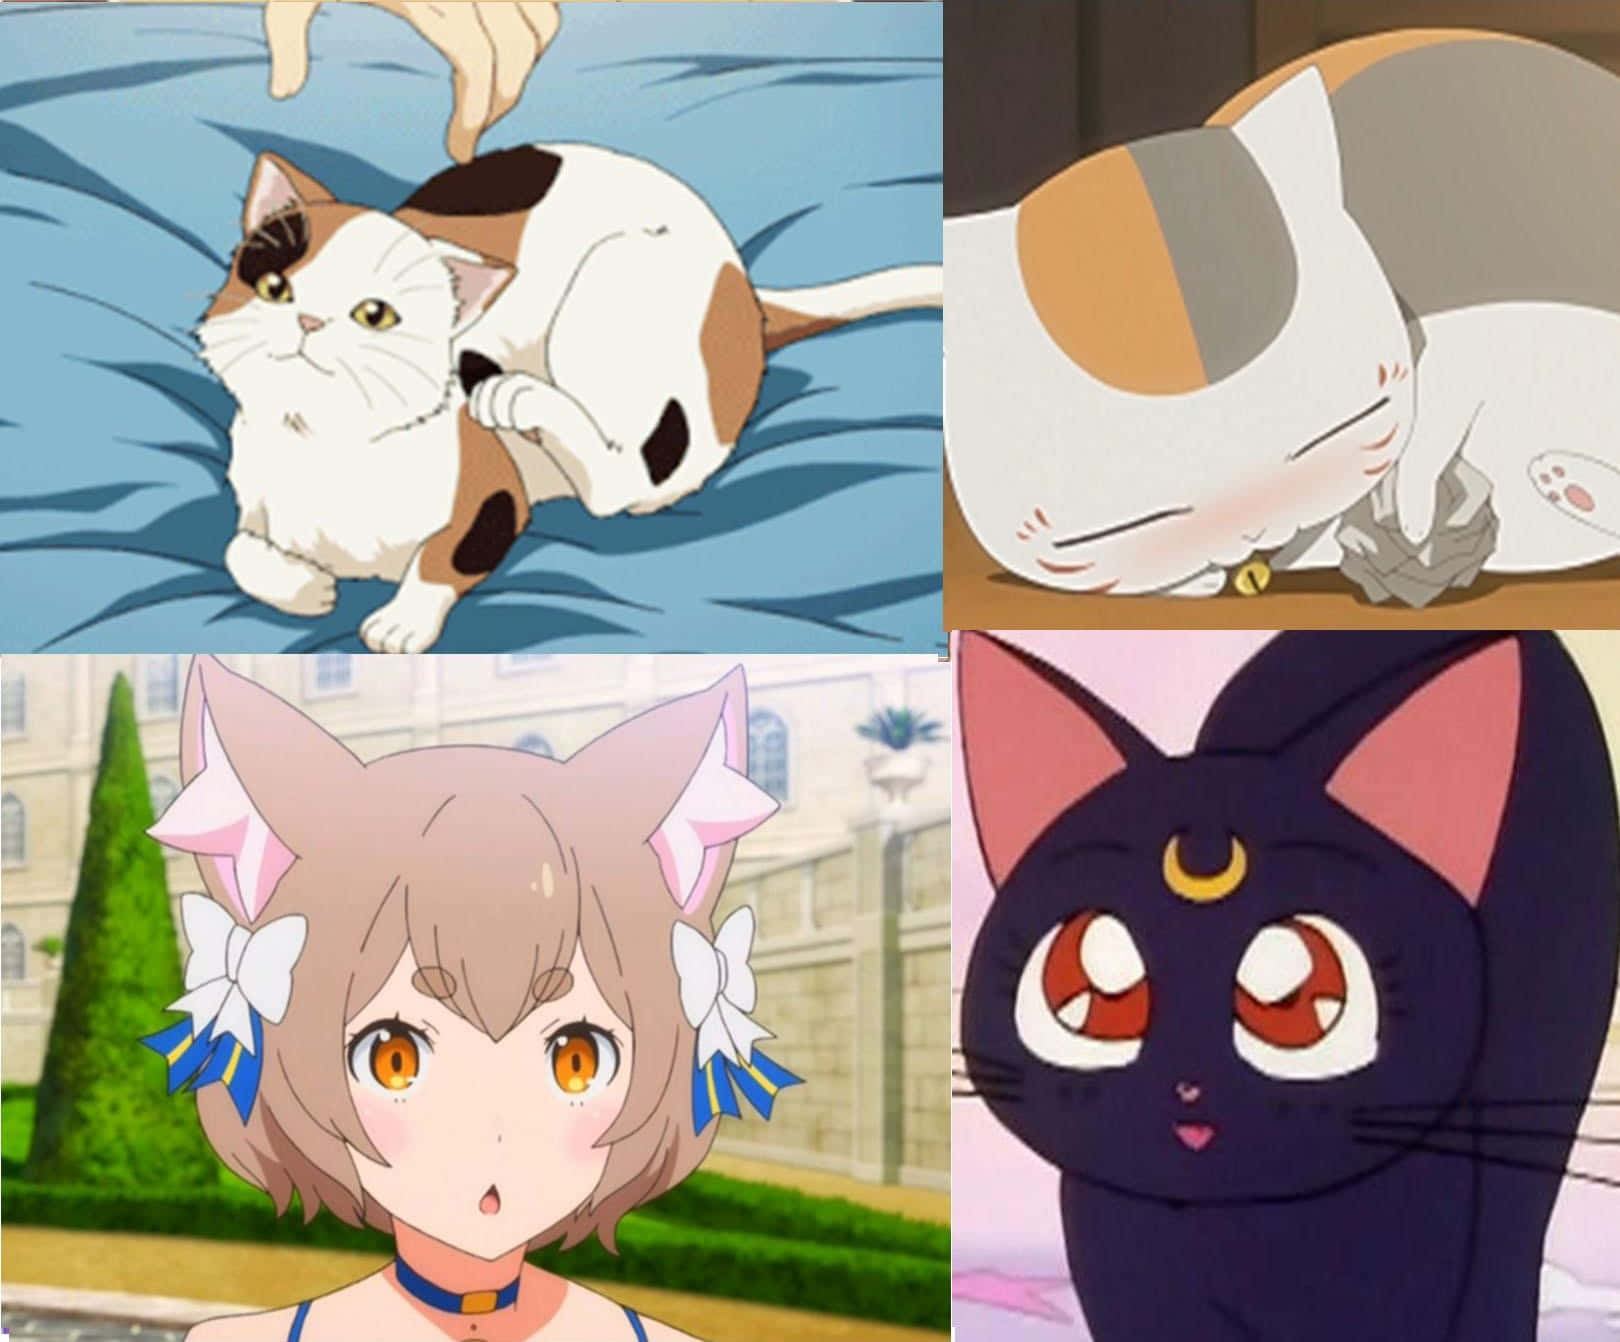 A Collage Of Anime Cats With Different Faces